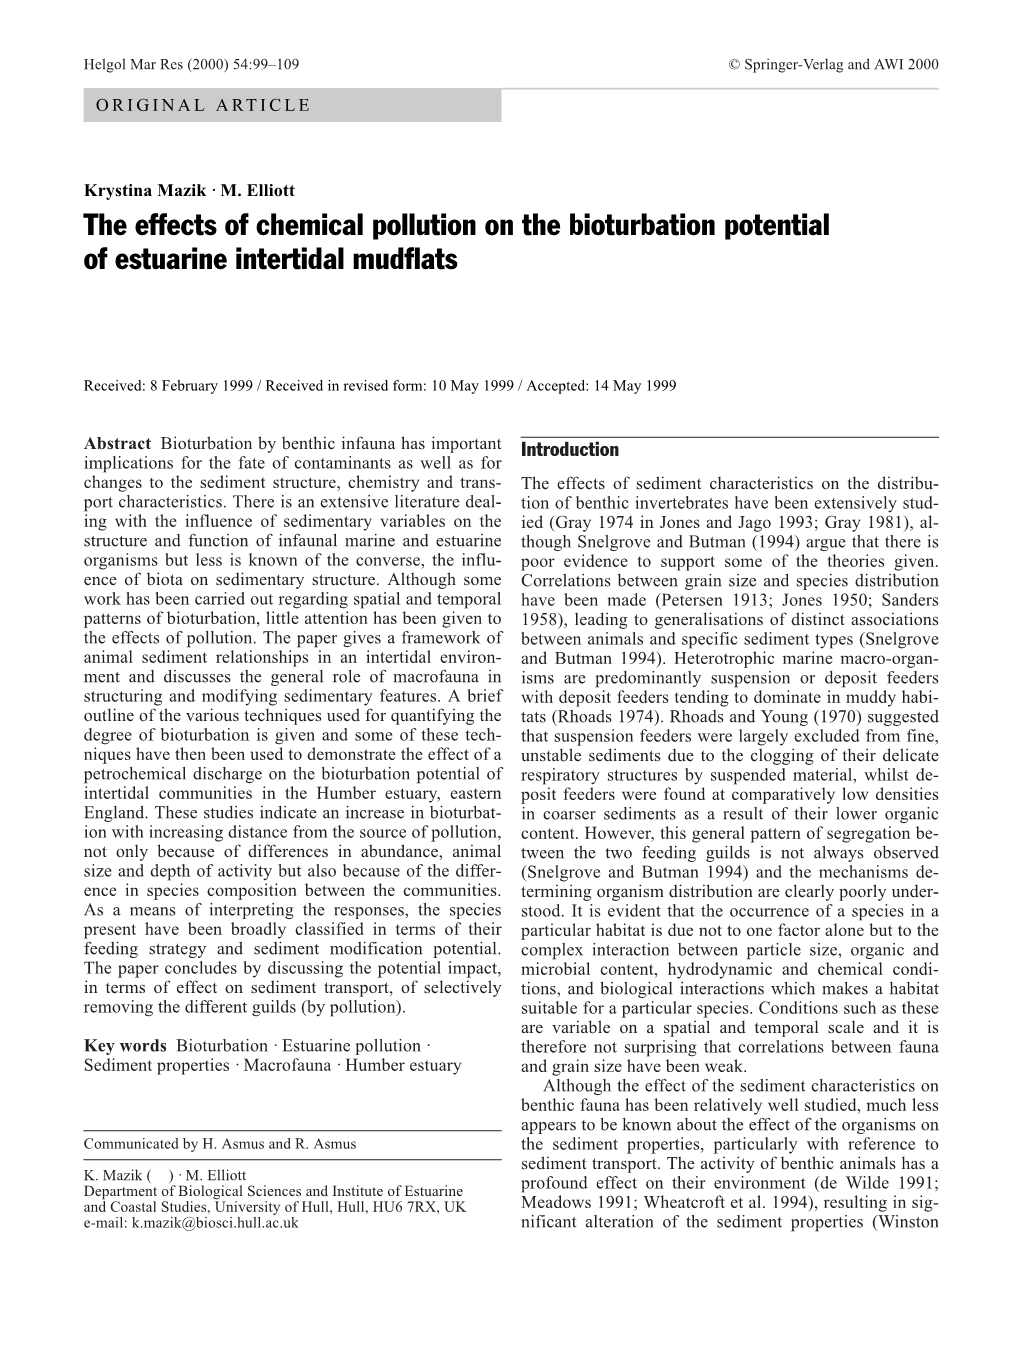 The Effects of Chemical Pollution on the Bioturbation Potential of Estuarine Intertidal Mudflats